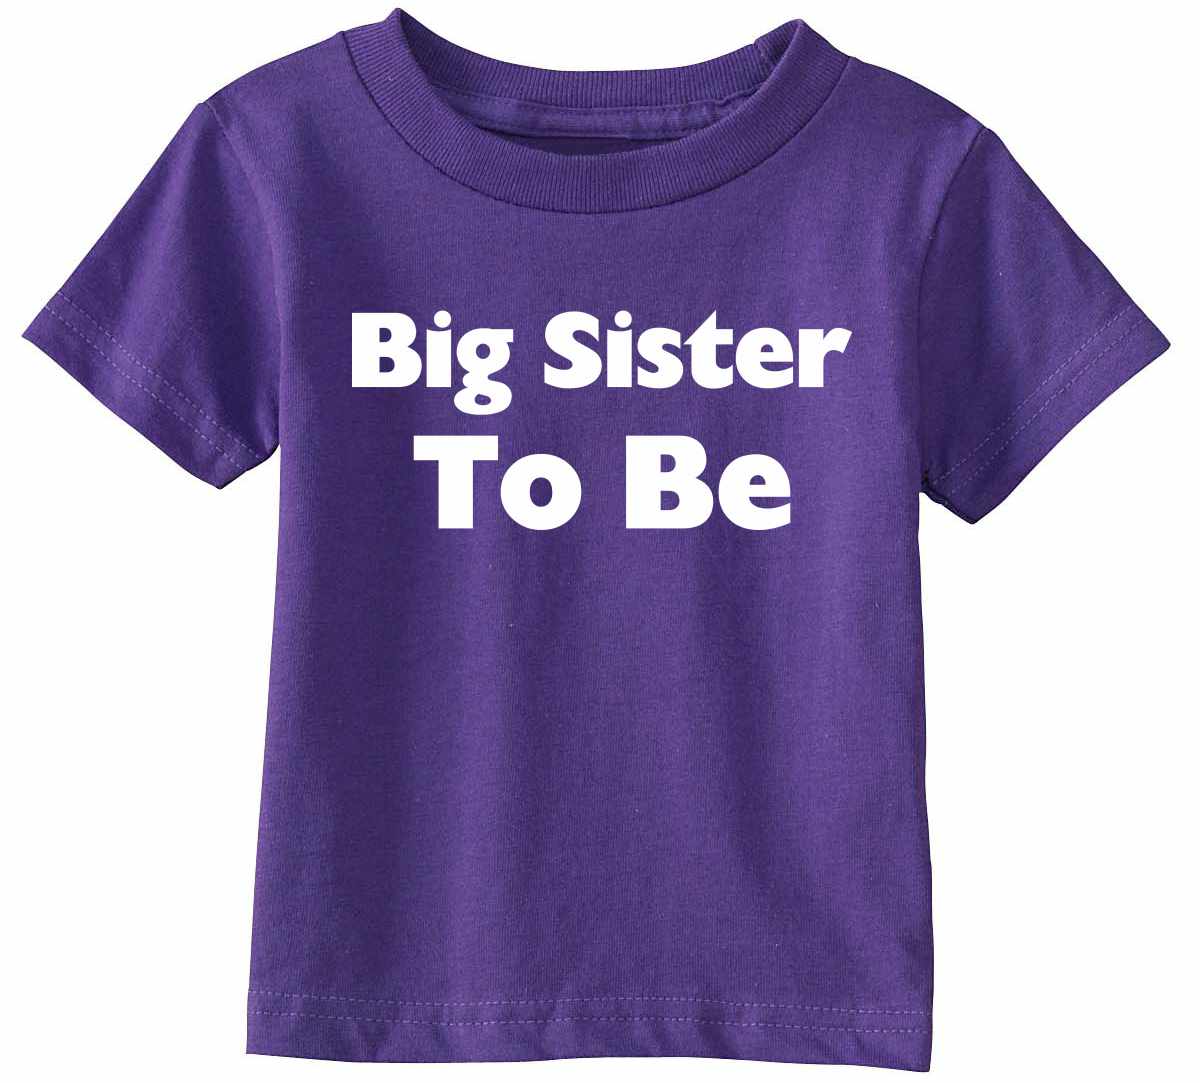 Big Sister To Be Infant/Toddler 